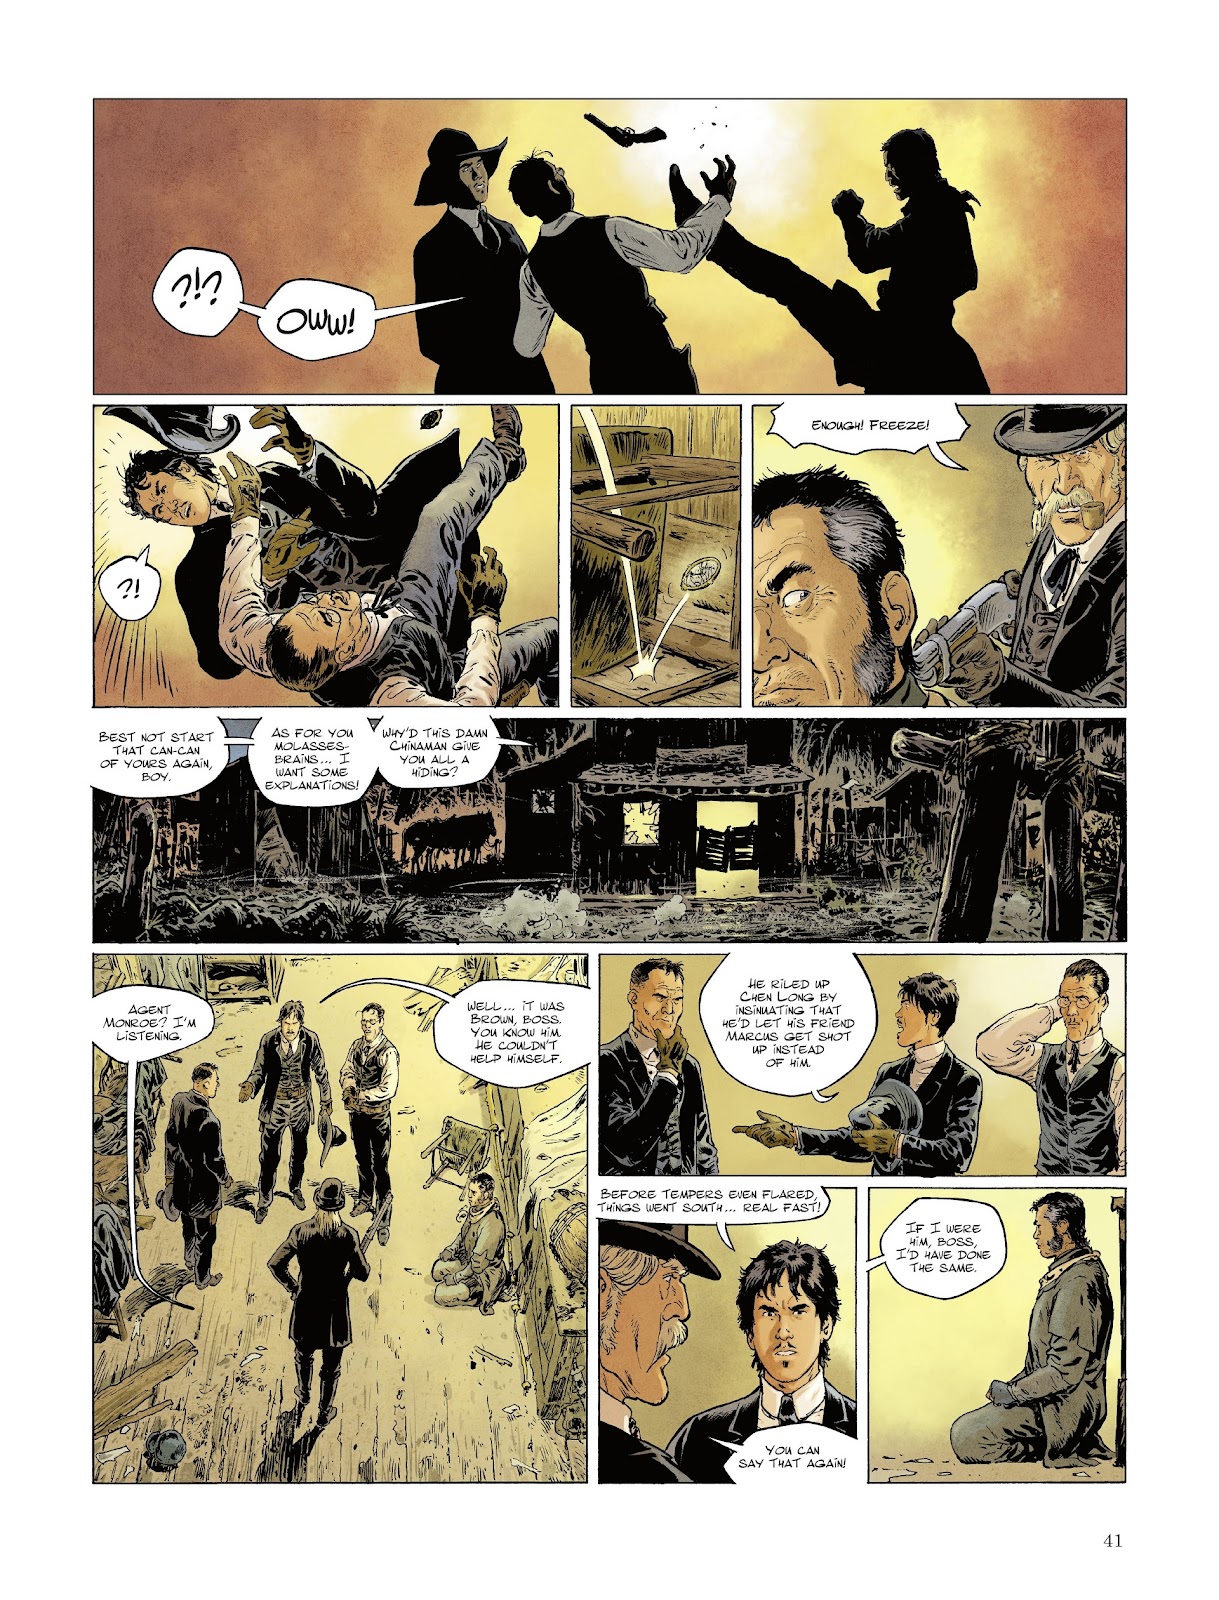 The Tiger Awakens: The Return of John Chinaman issue 1 - Page 42